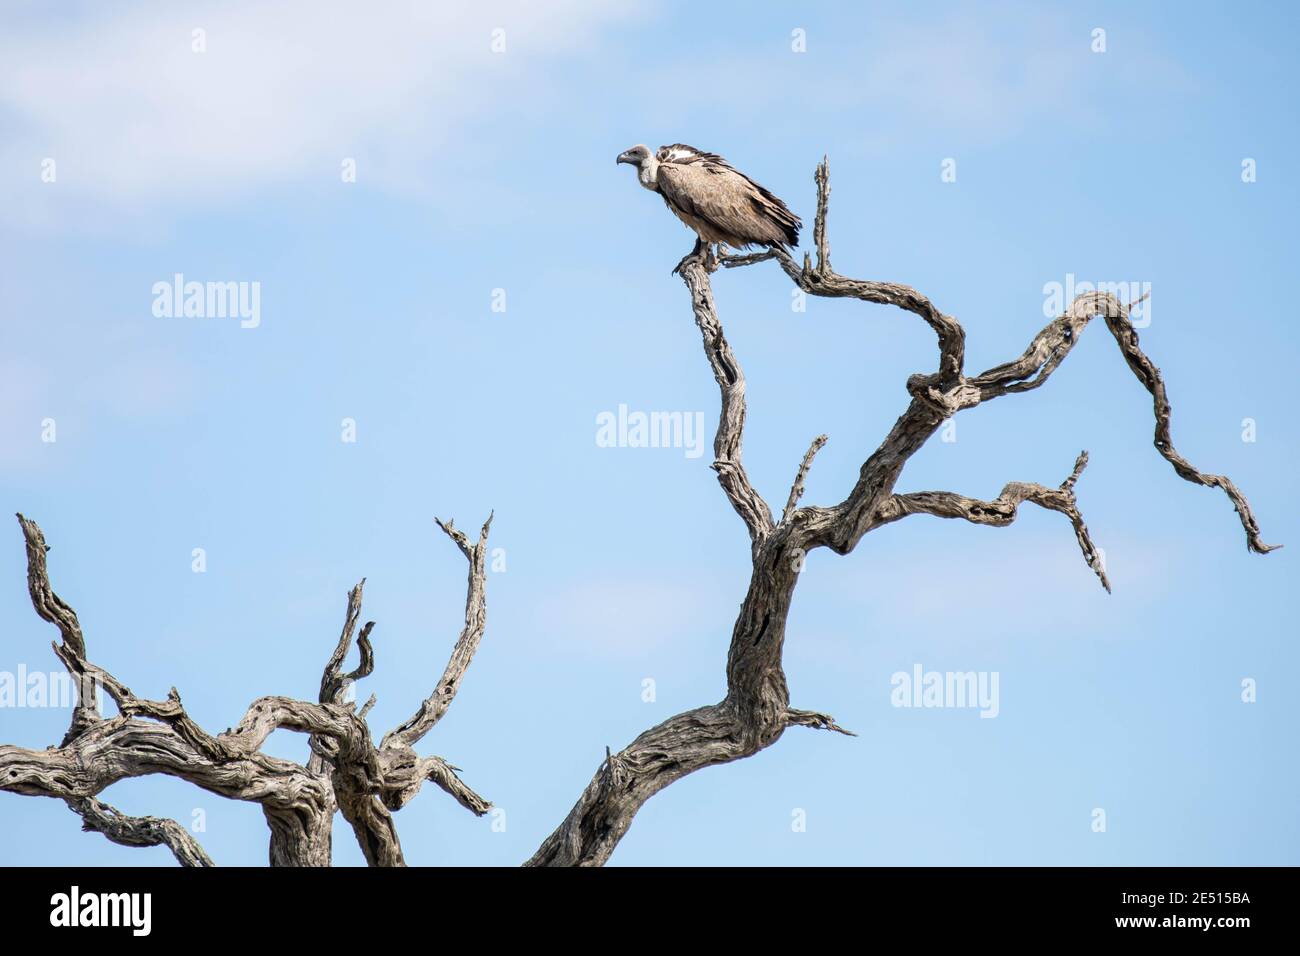 In south african savanna a vulture is perched on a branch of a dead tree, against a blue sky with puffy clouds Stock Photo